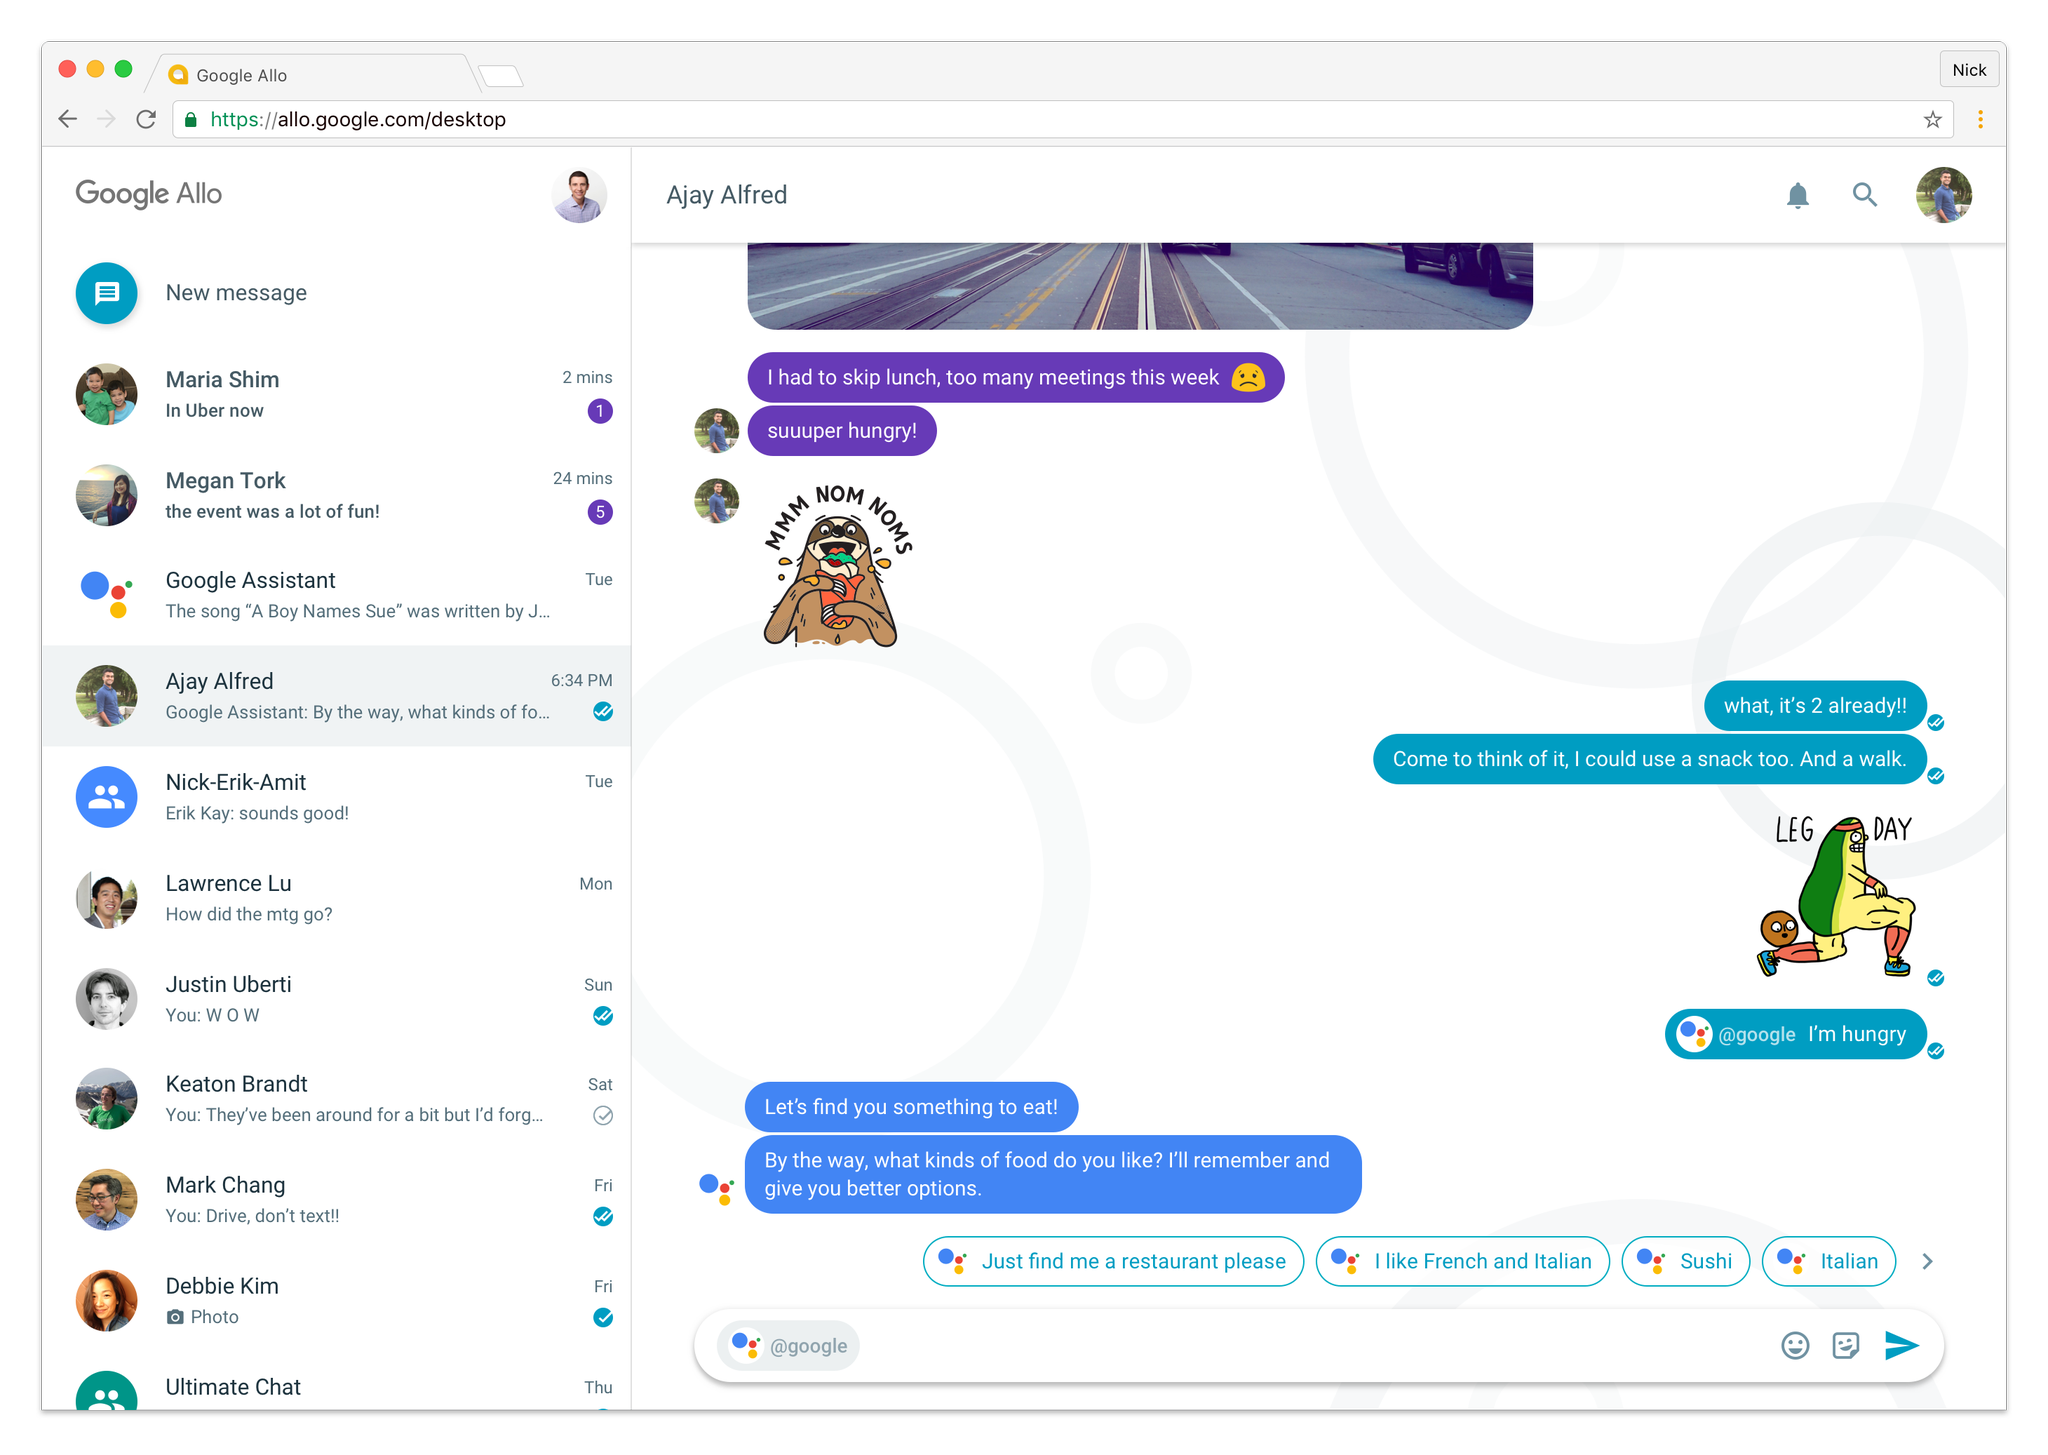 Google Allo will soon be available on your desktop/laptop